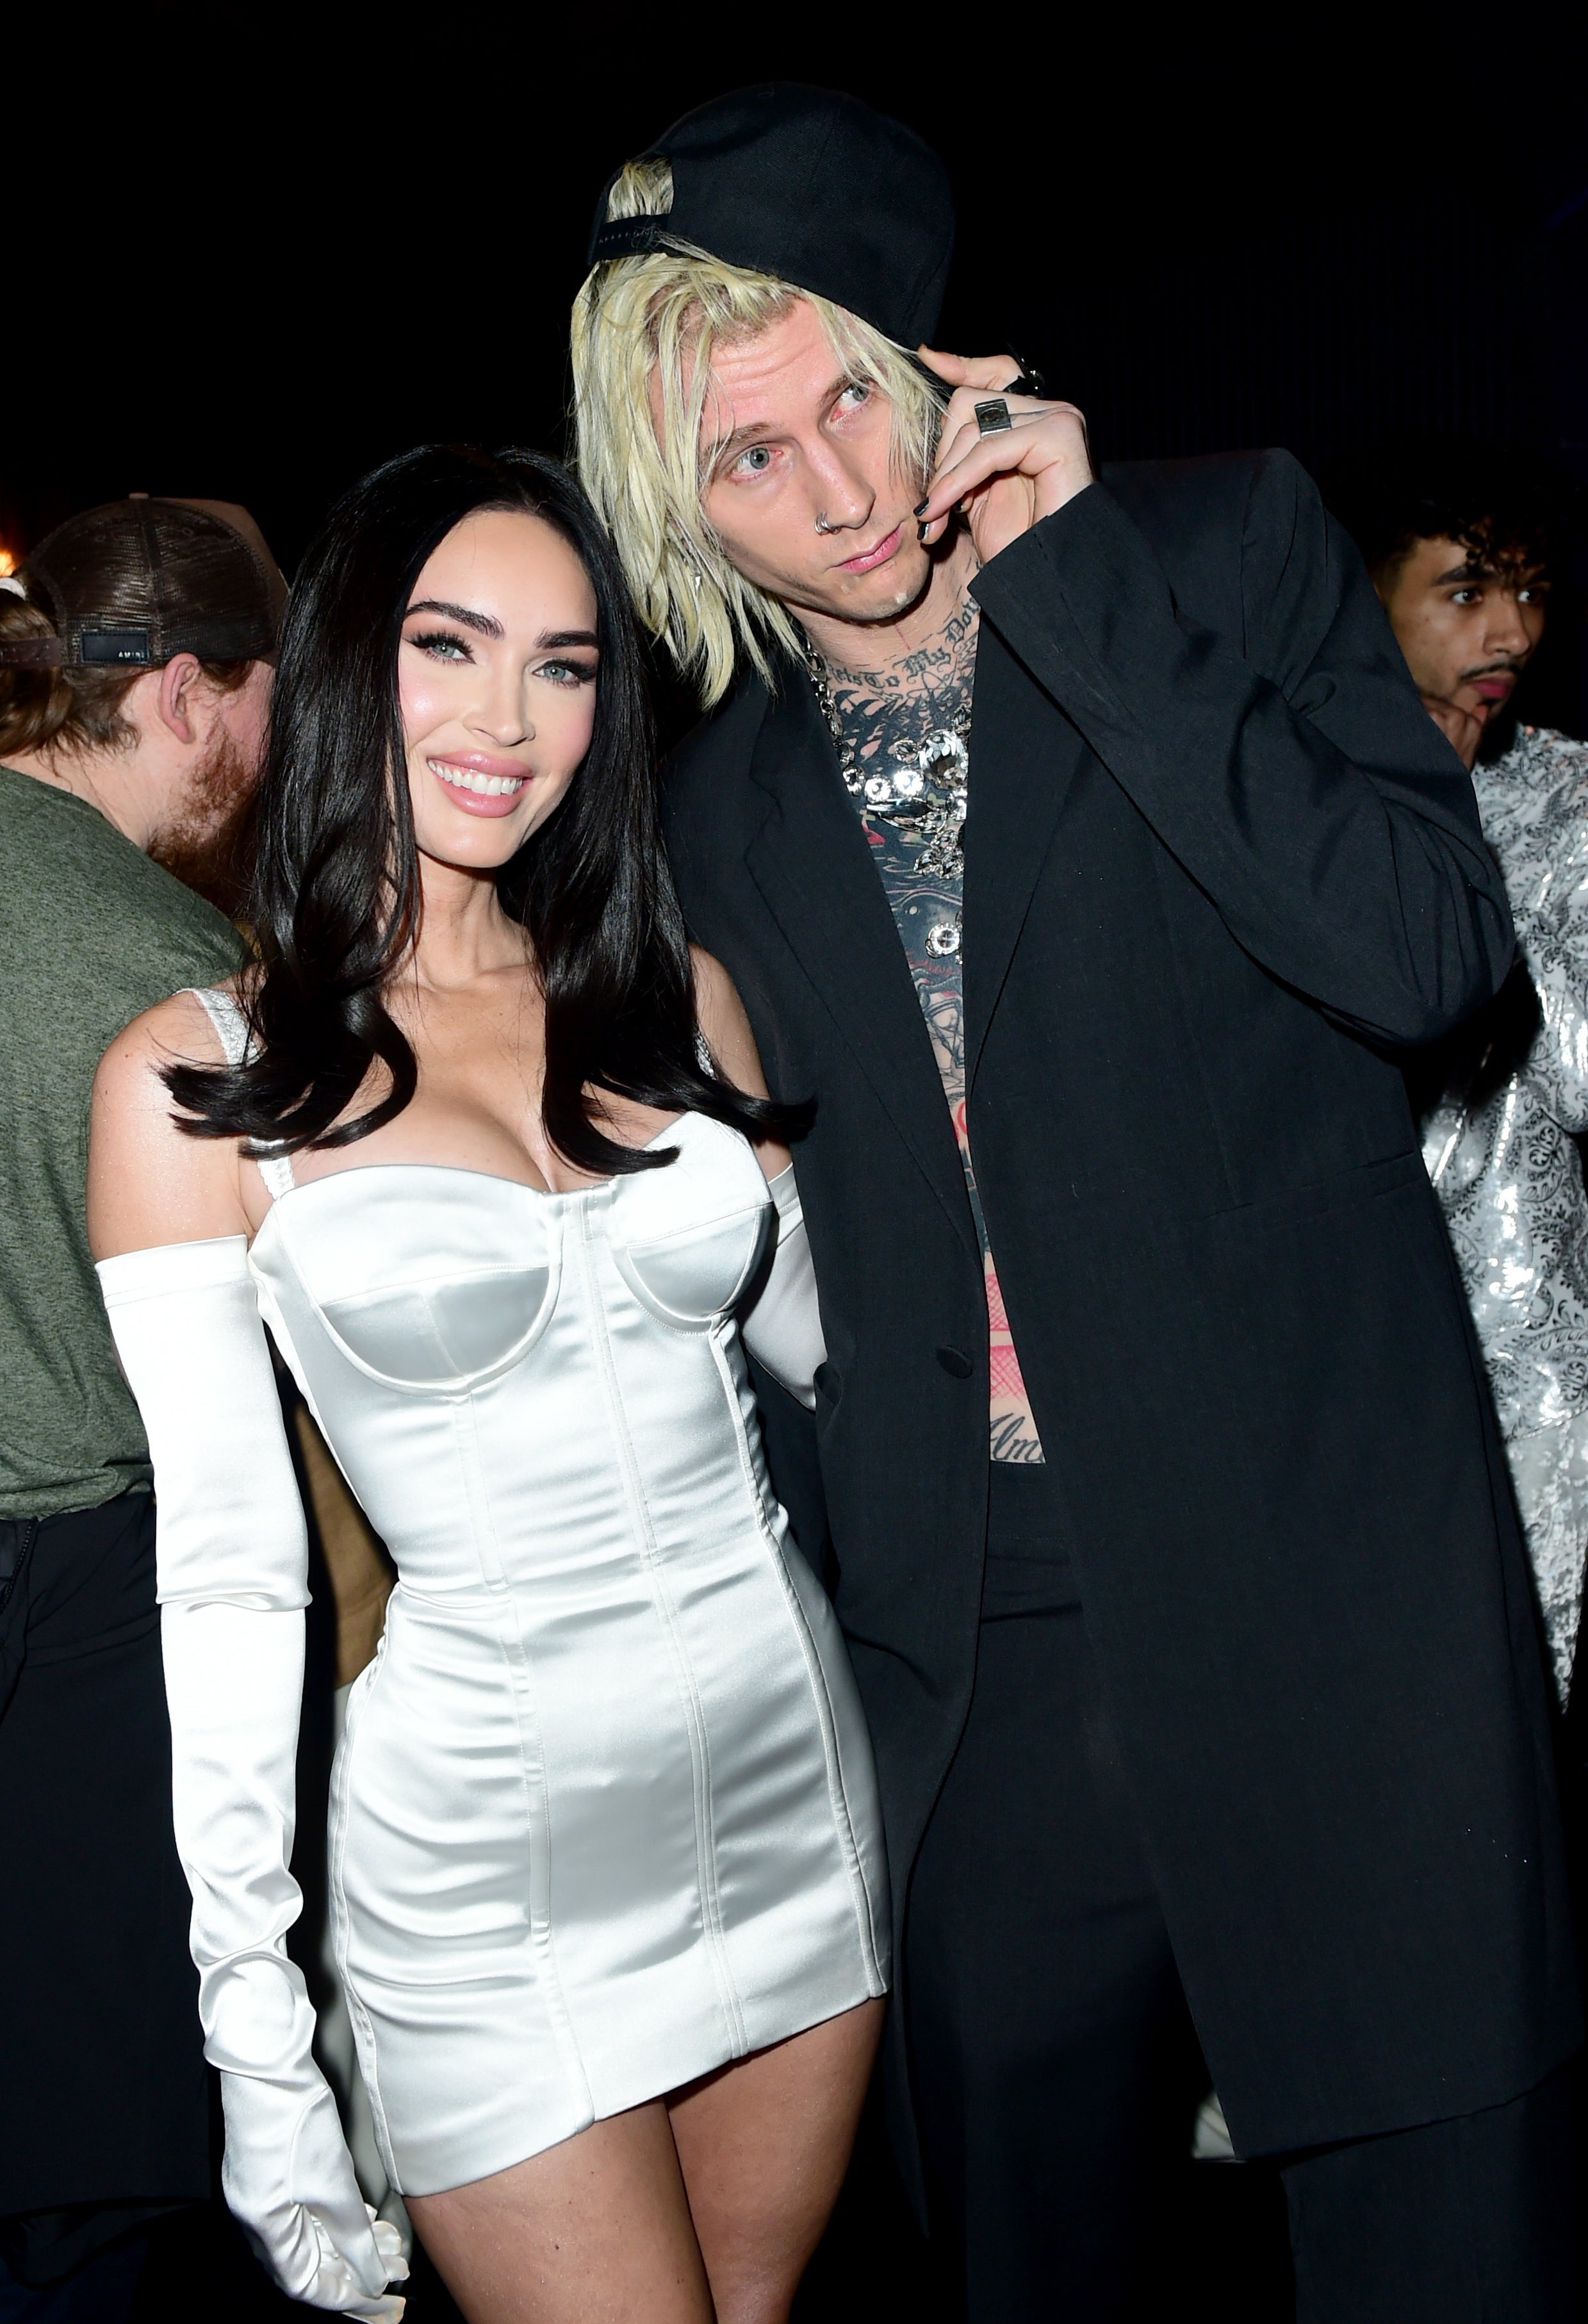 Megan Fox in a corset dress with gloves, and Machine Gun Kelly in a suit with silver chain necklaces at an event